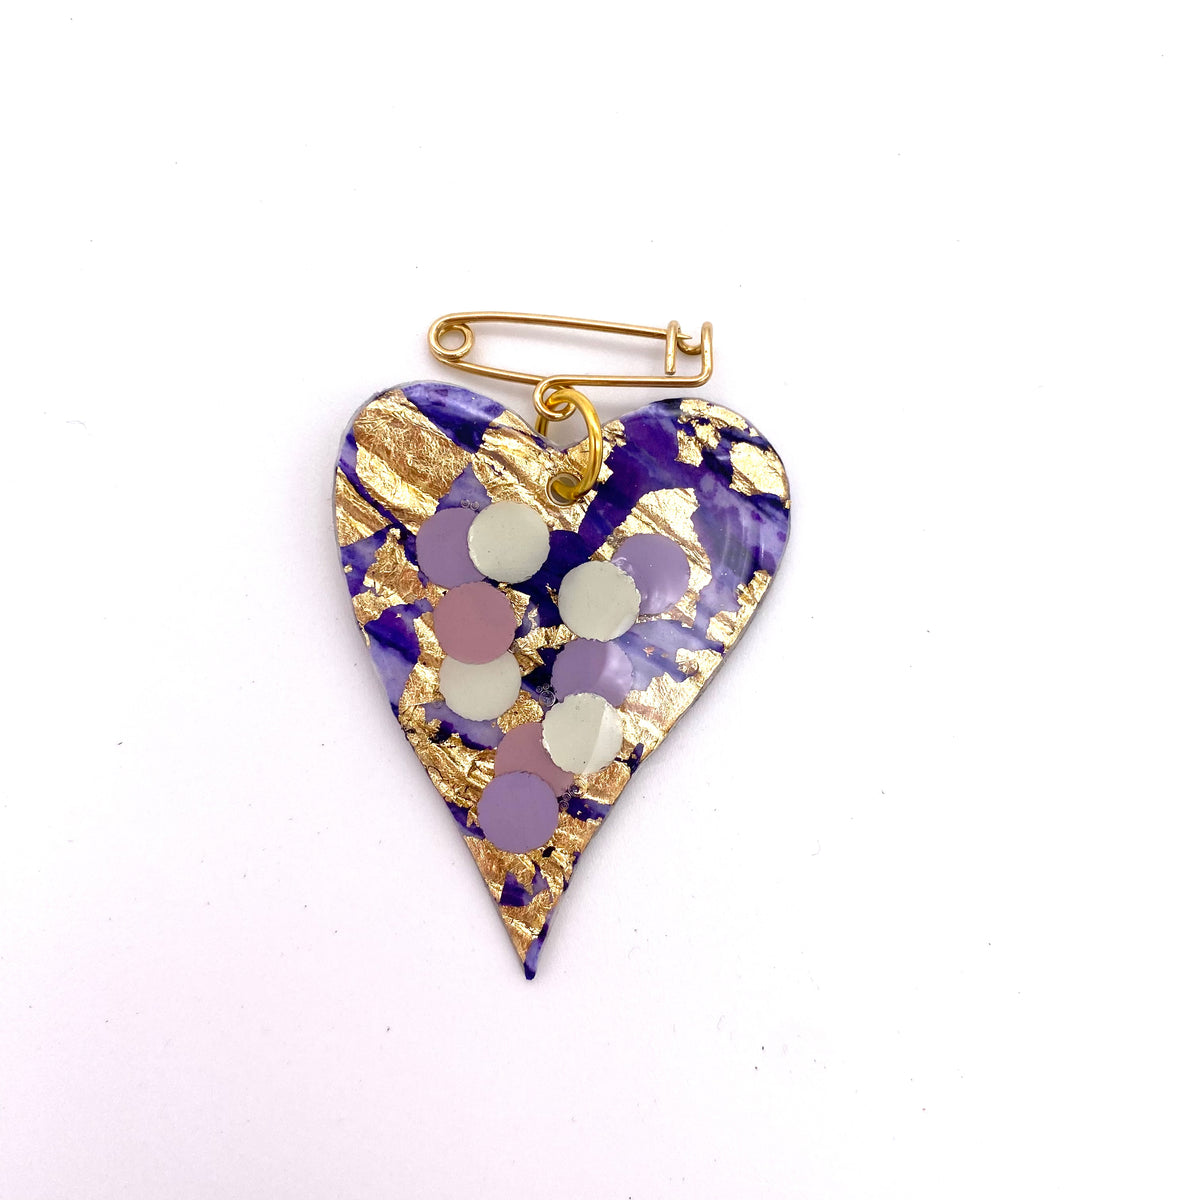 Crush sgraffito pin brooch in lilac/gold with dots